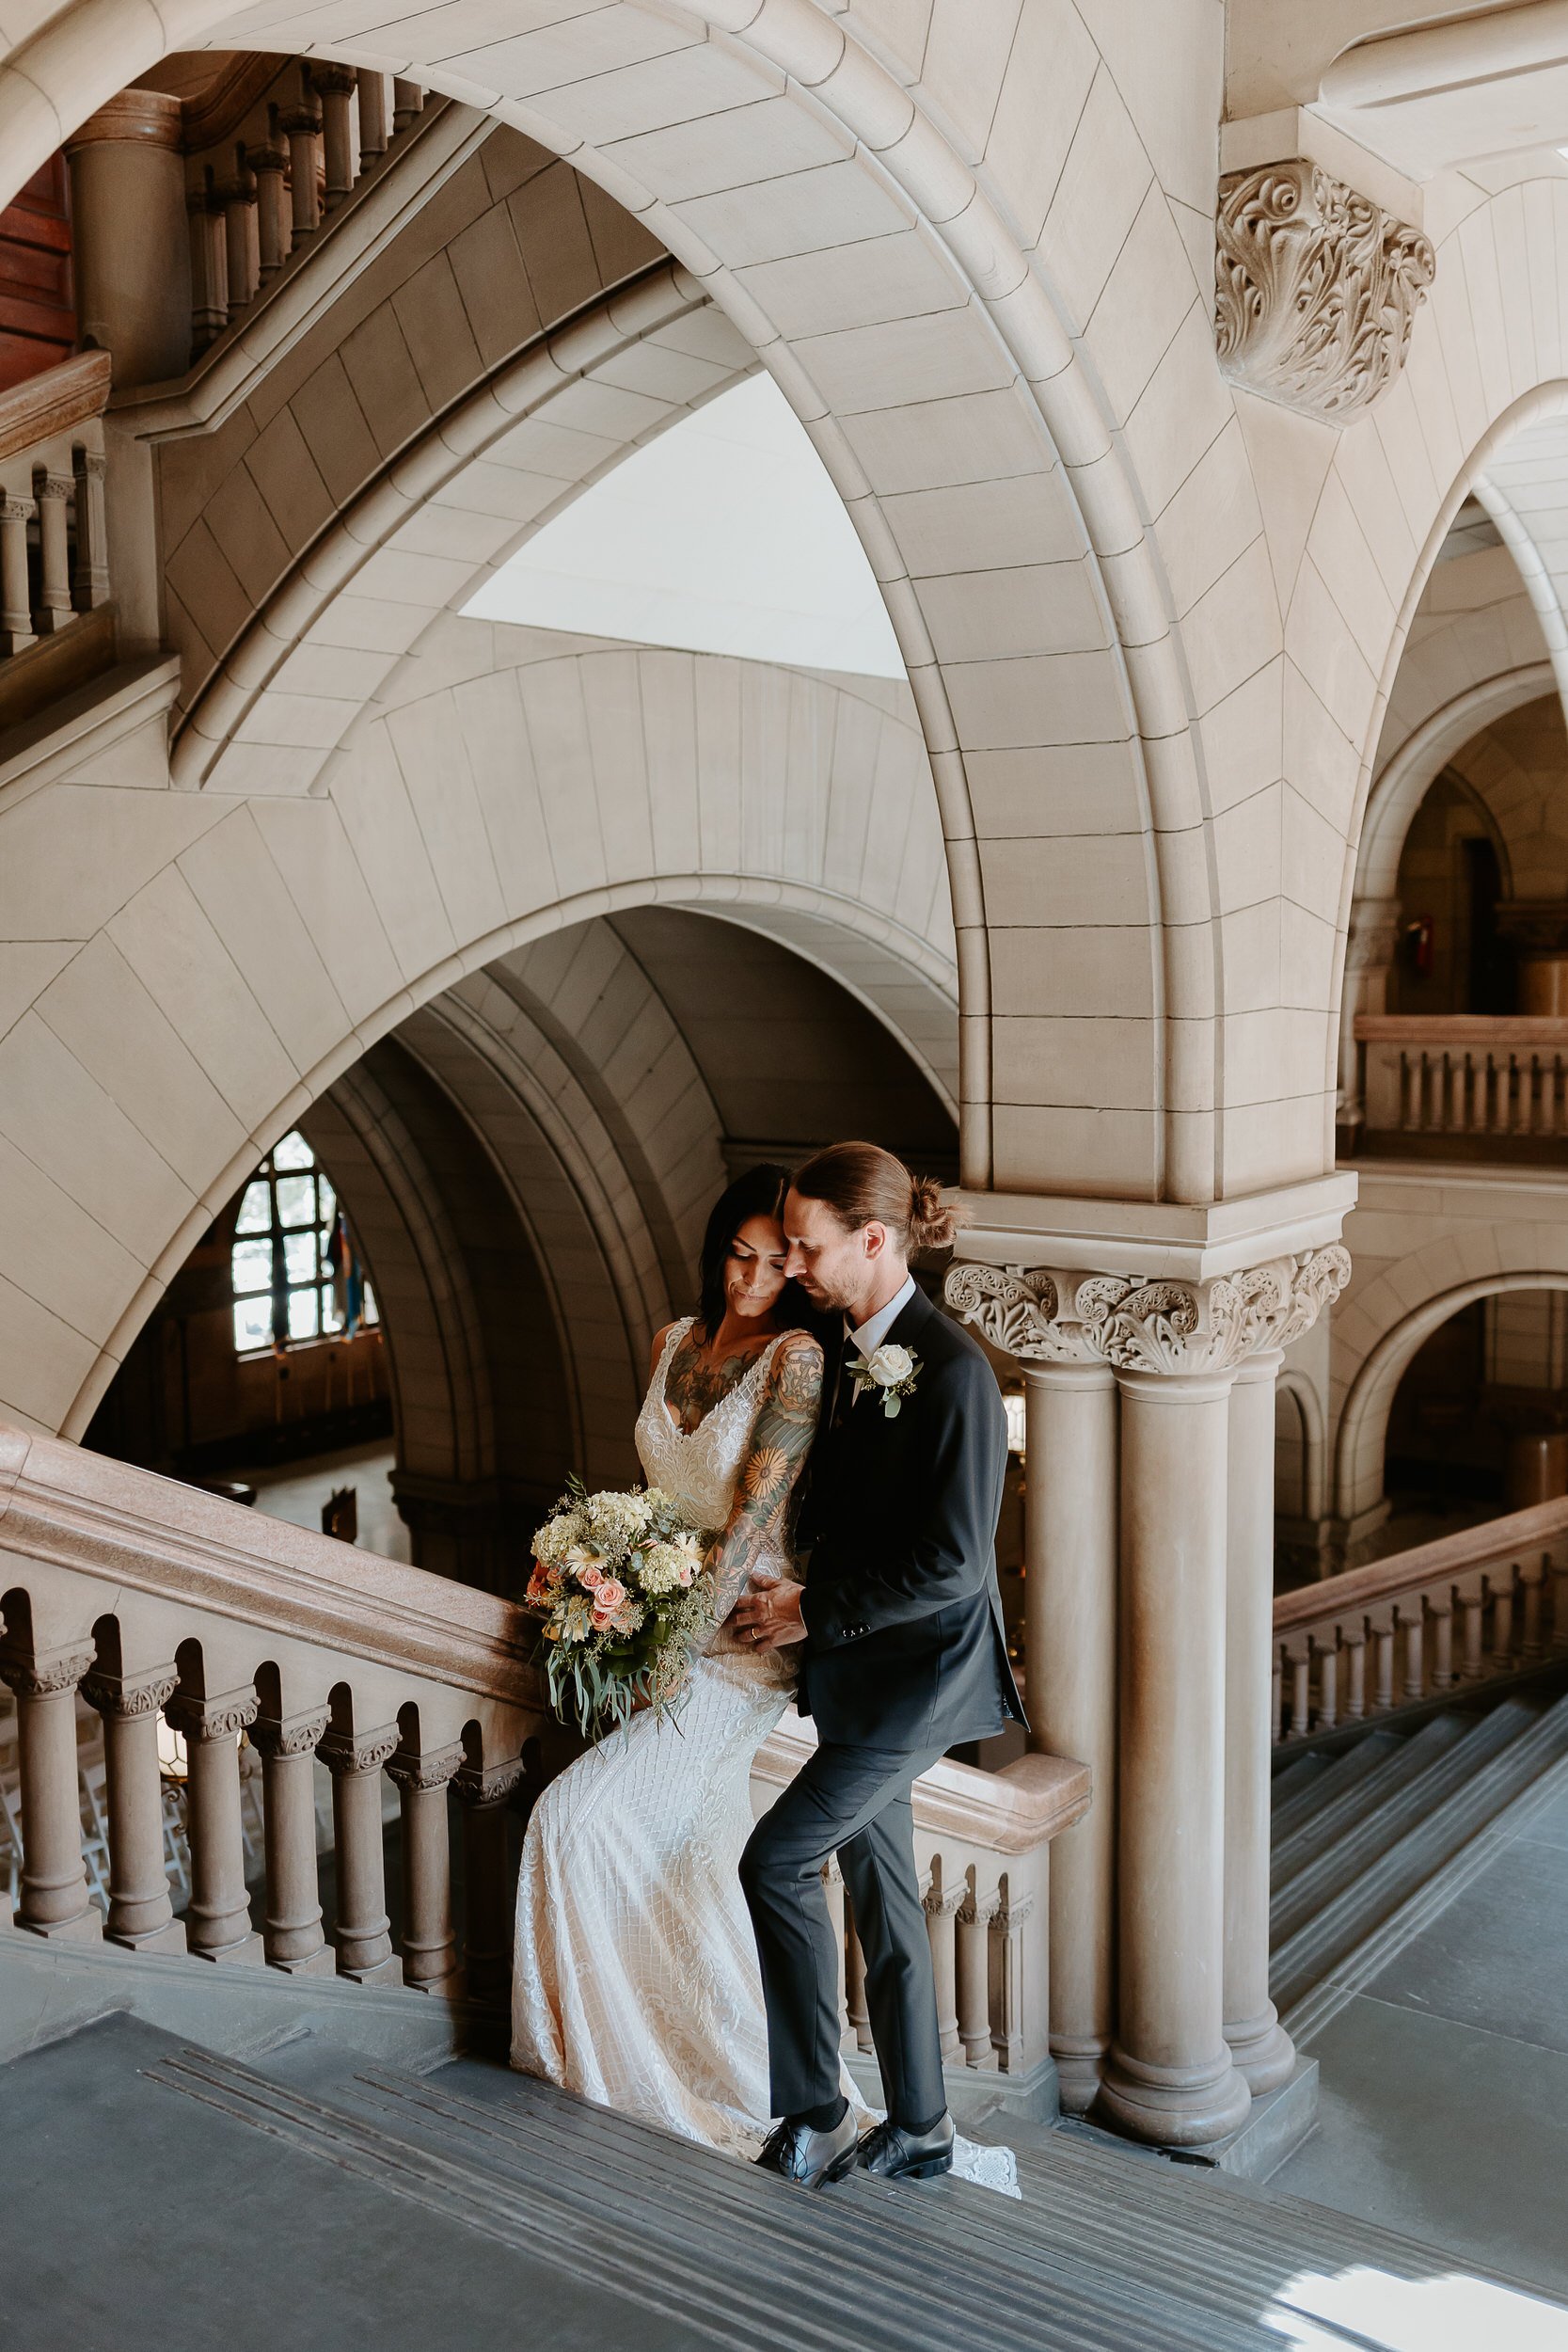 Bride and groom stand on stairs, embracing each other at courthouse.